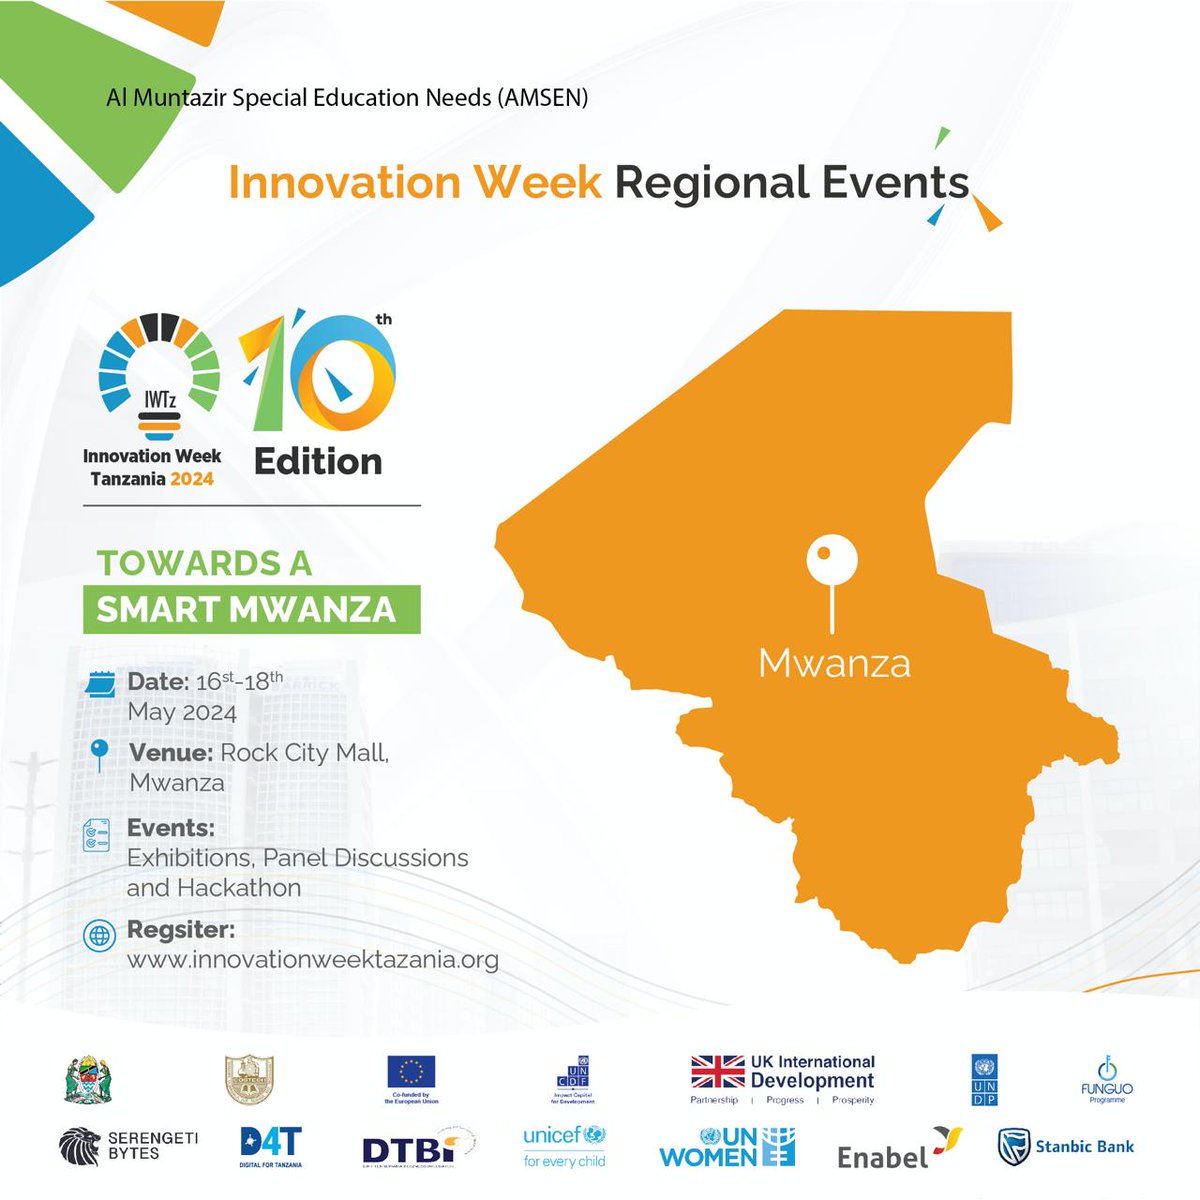 Mwanza! Innovation Week Tanzania 2024 will be taking place in Mwanza from May 16th to May 18th, 2024, at Rock City Mall Manza! Thought-provoking panel discussions, exciting exhibitions and a Hackathon like none-other lay in store for you all! Mark your calendars for this one!